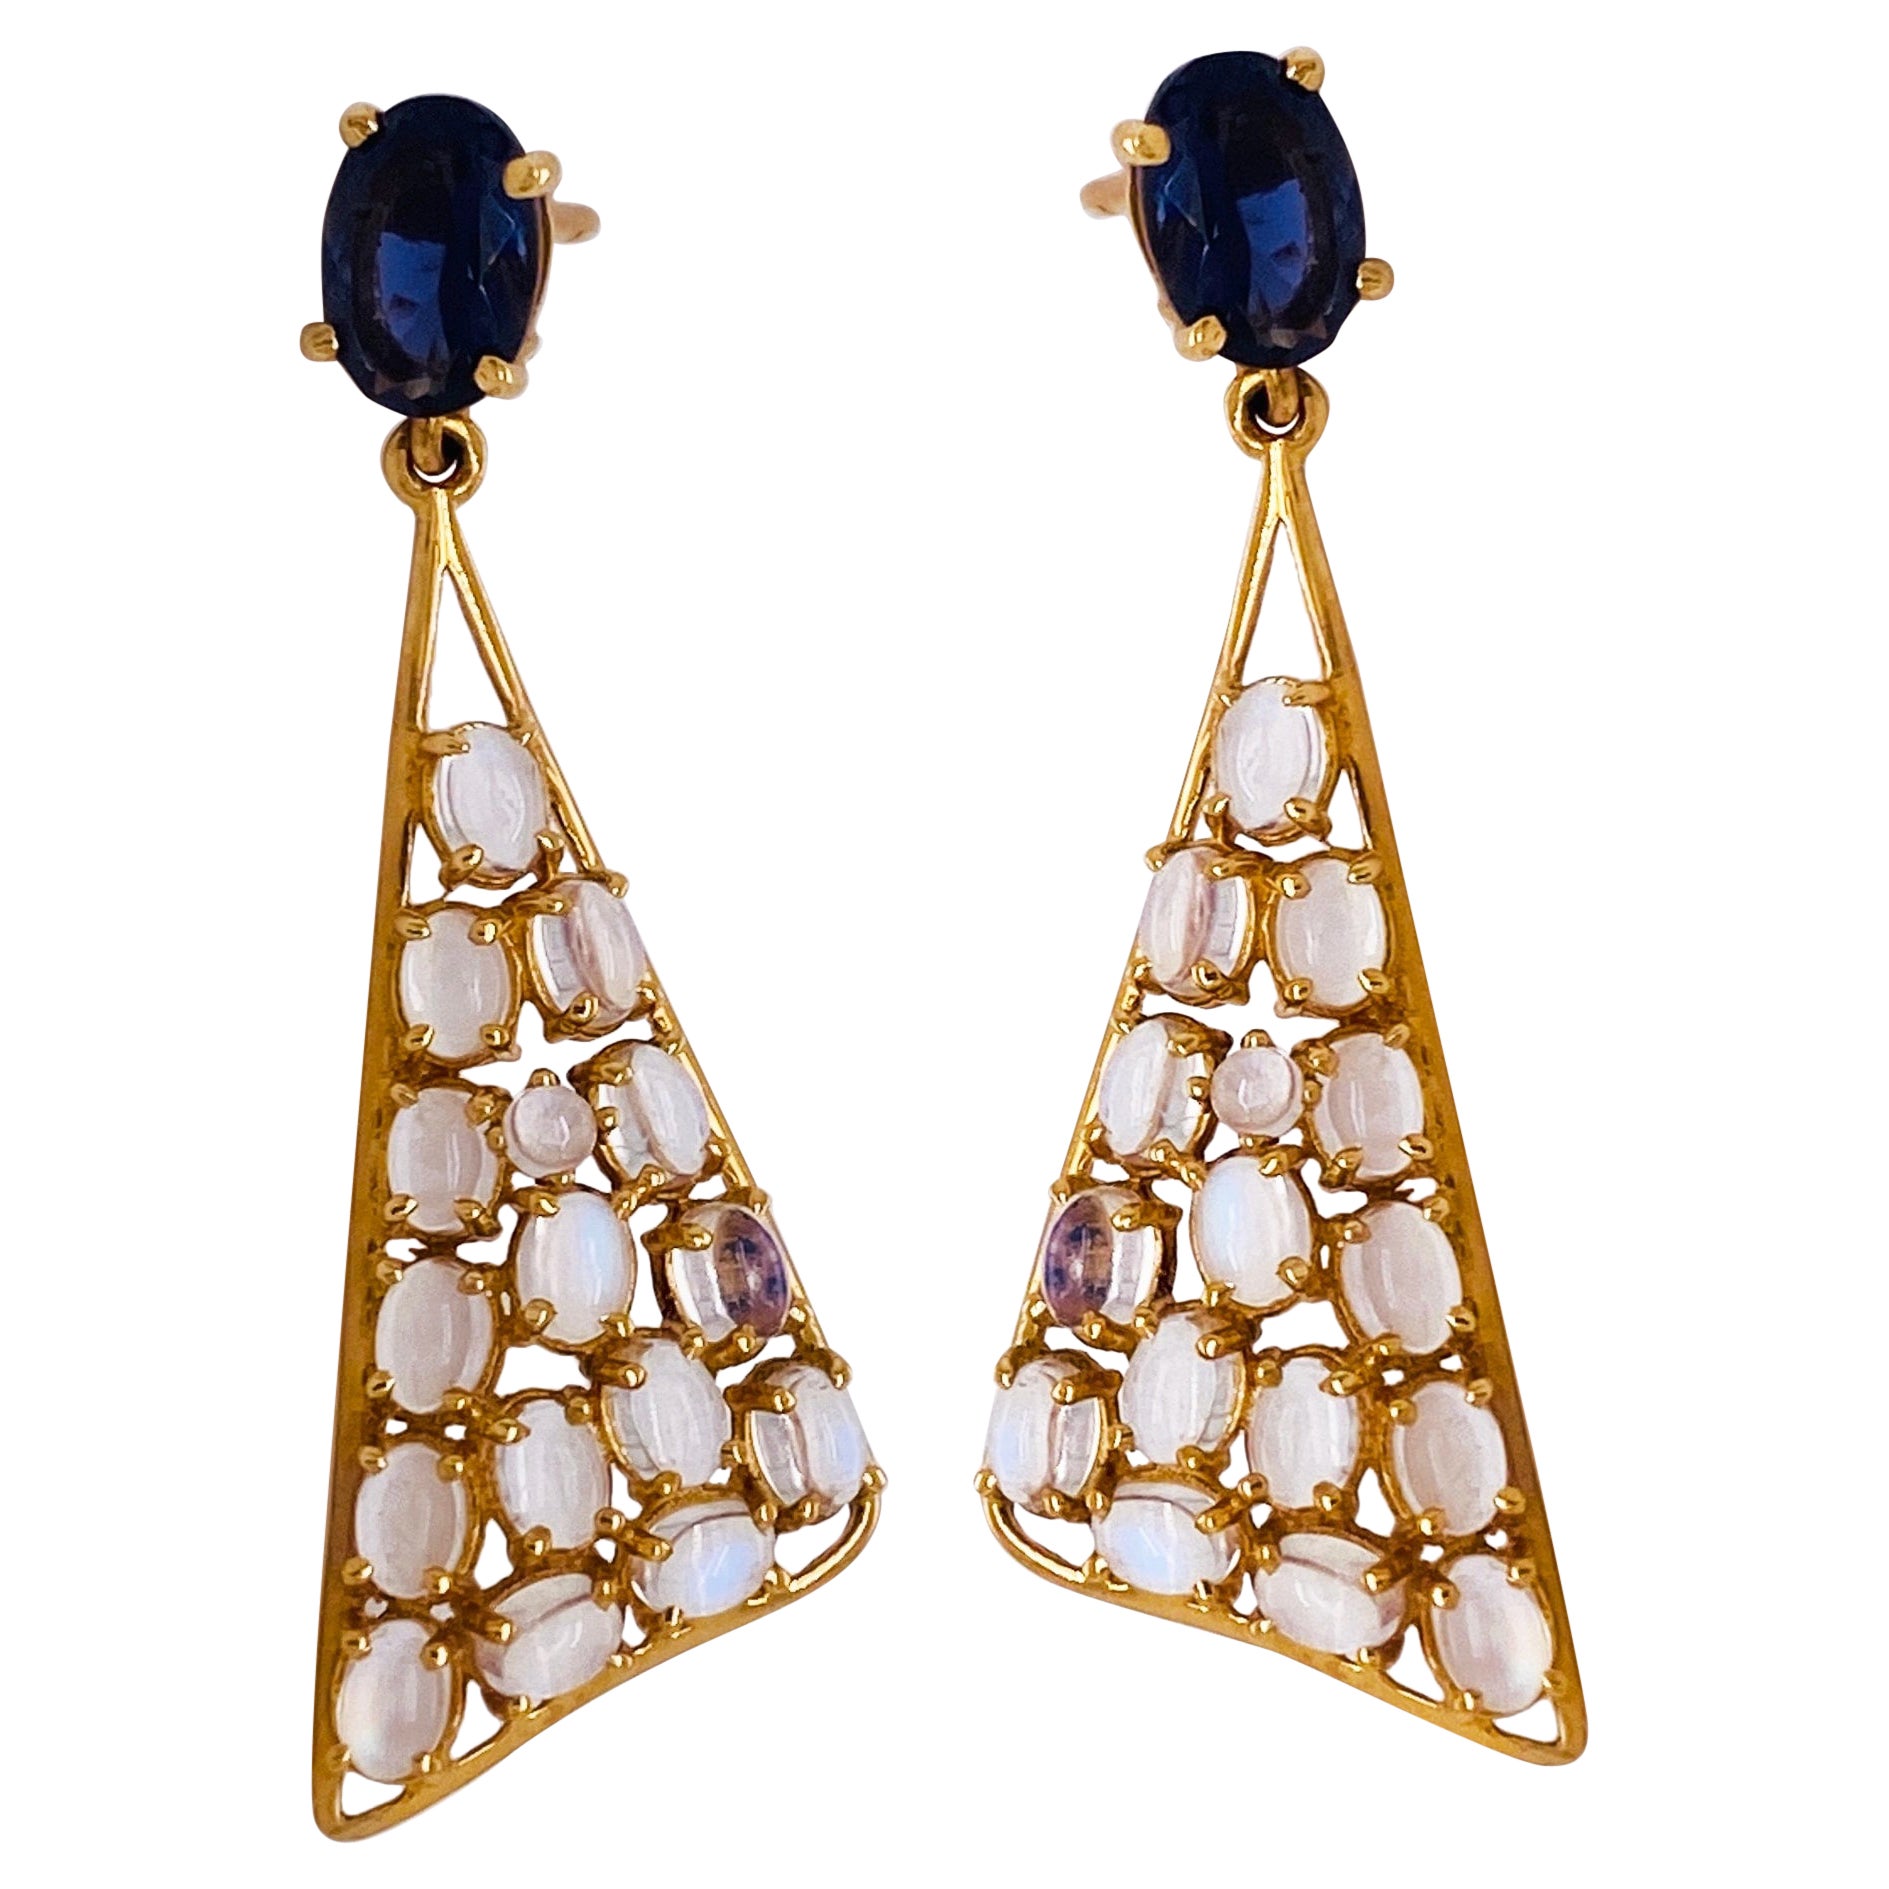 2.55 Carats Sapphires & 2.80 Carats Moonstones, 18K Gold Statement Earrings 'Lv'